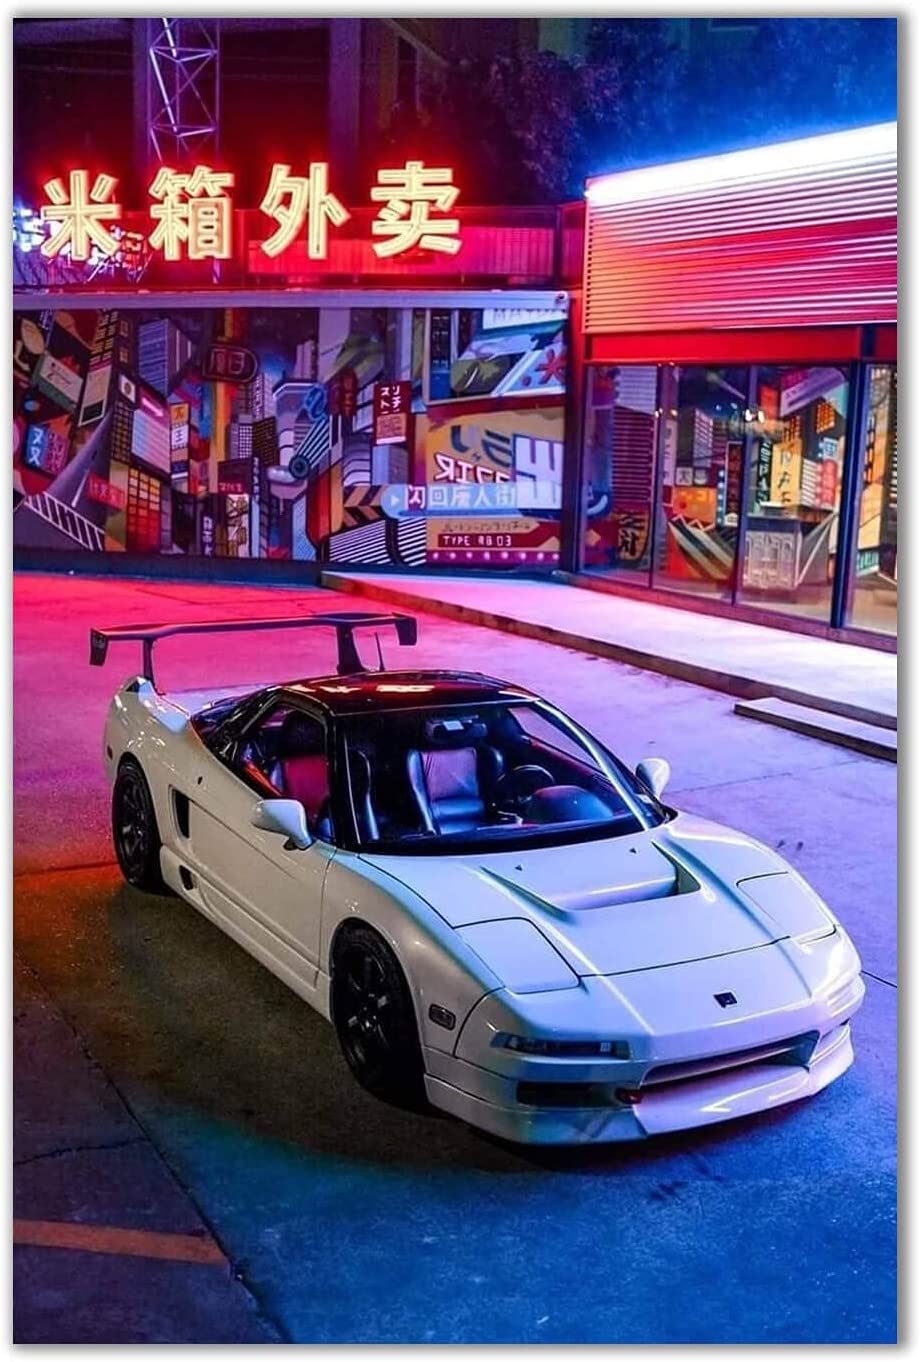 A white sports car parked in front of an asian restaurant - JDM